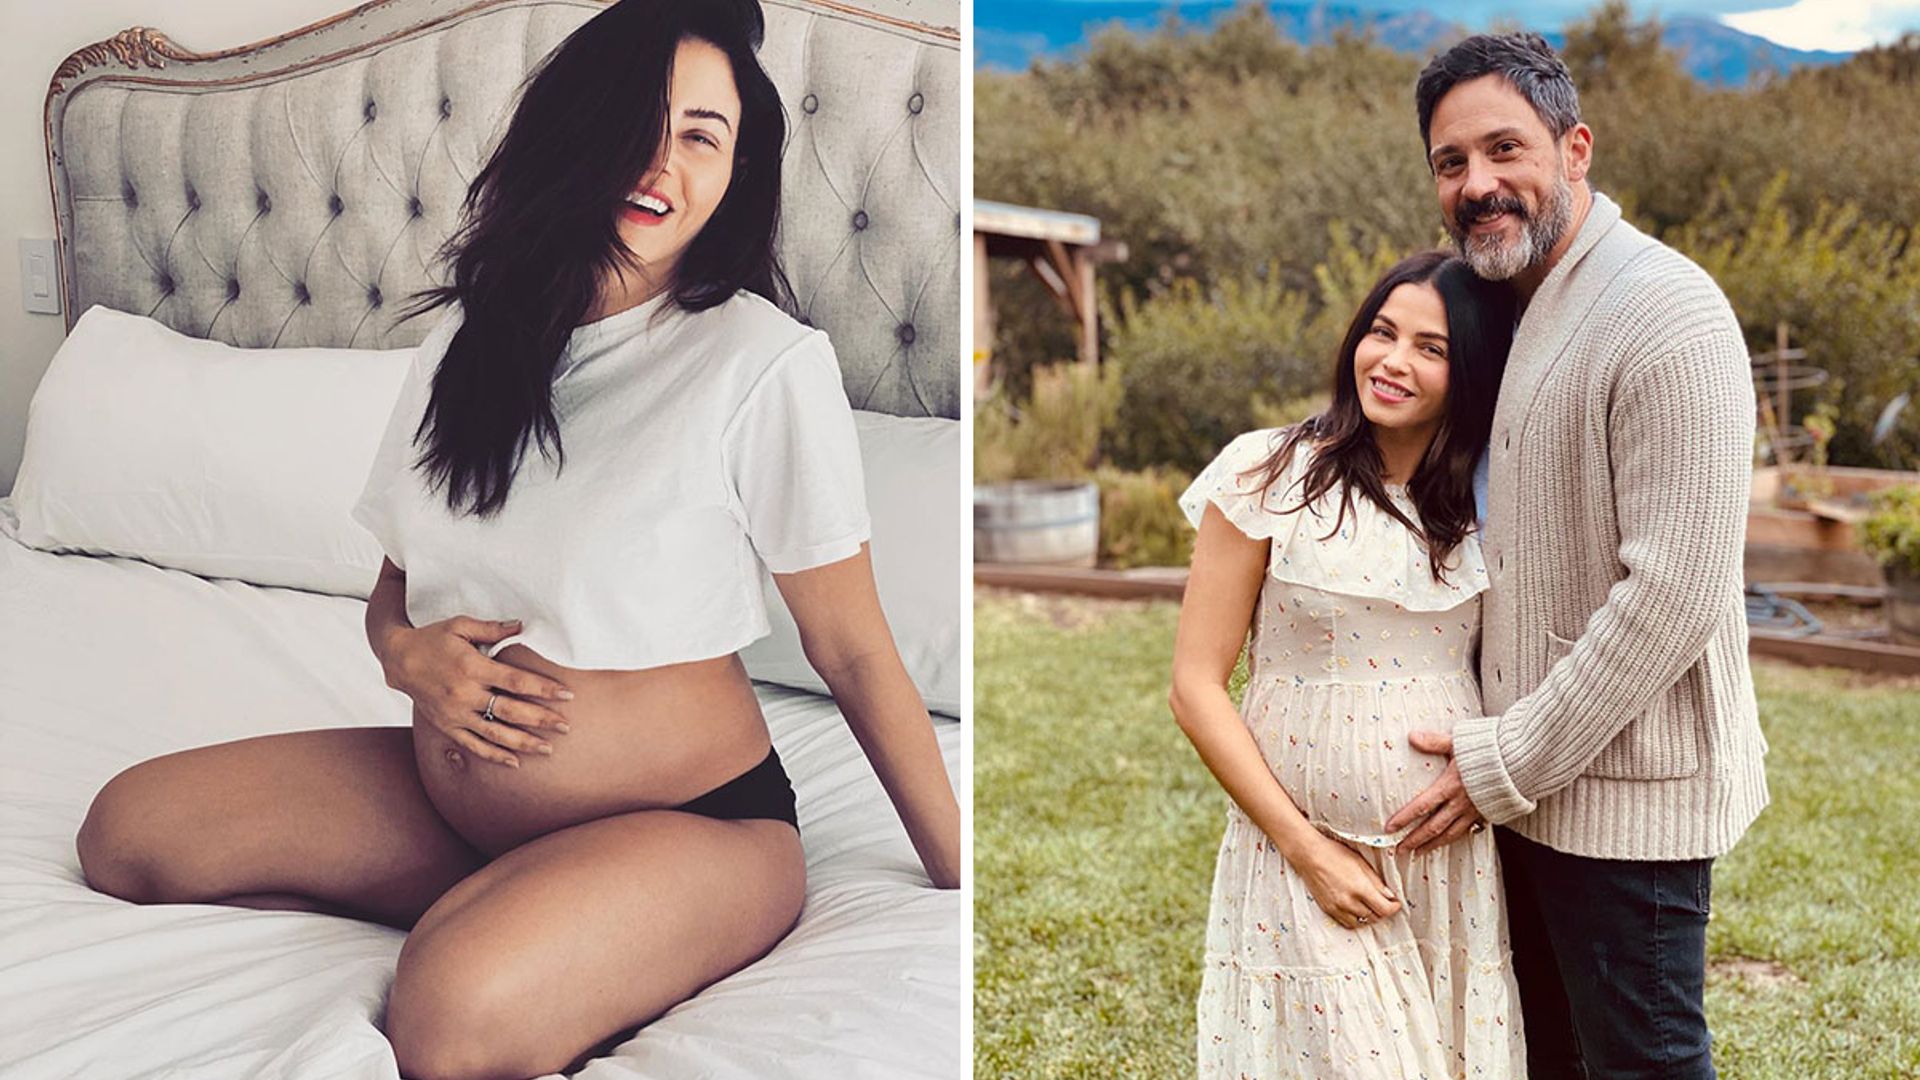 Jenna Dewan gives birth to a baby boy and reveals his sweet name – see the adorable first pic